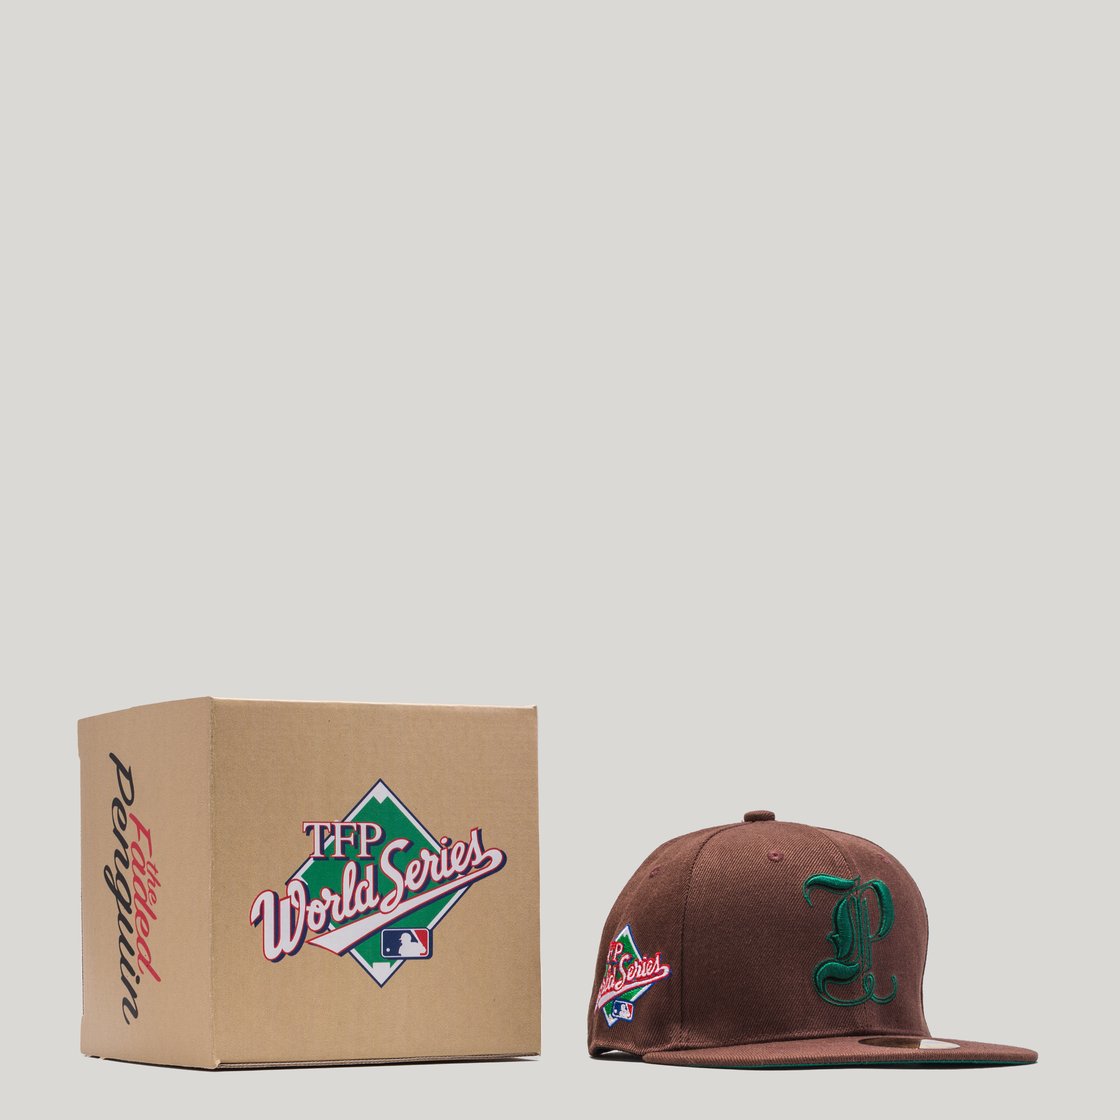 Image of theFADEDpenguin™ x New Era "World Series" Fitted (Brown)